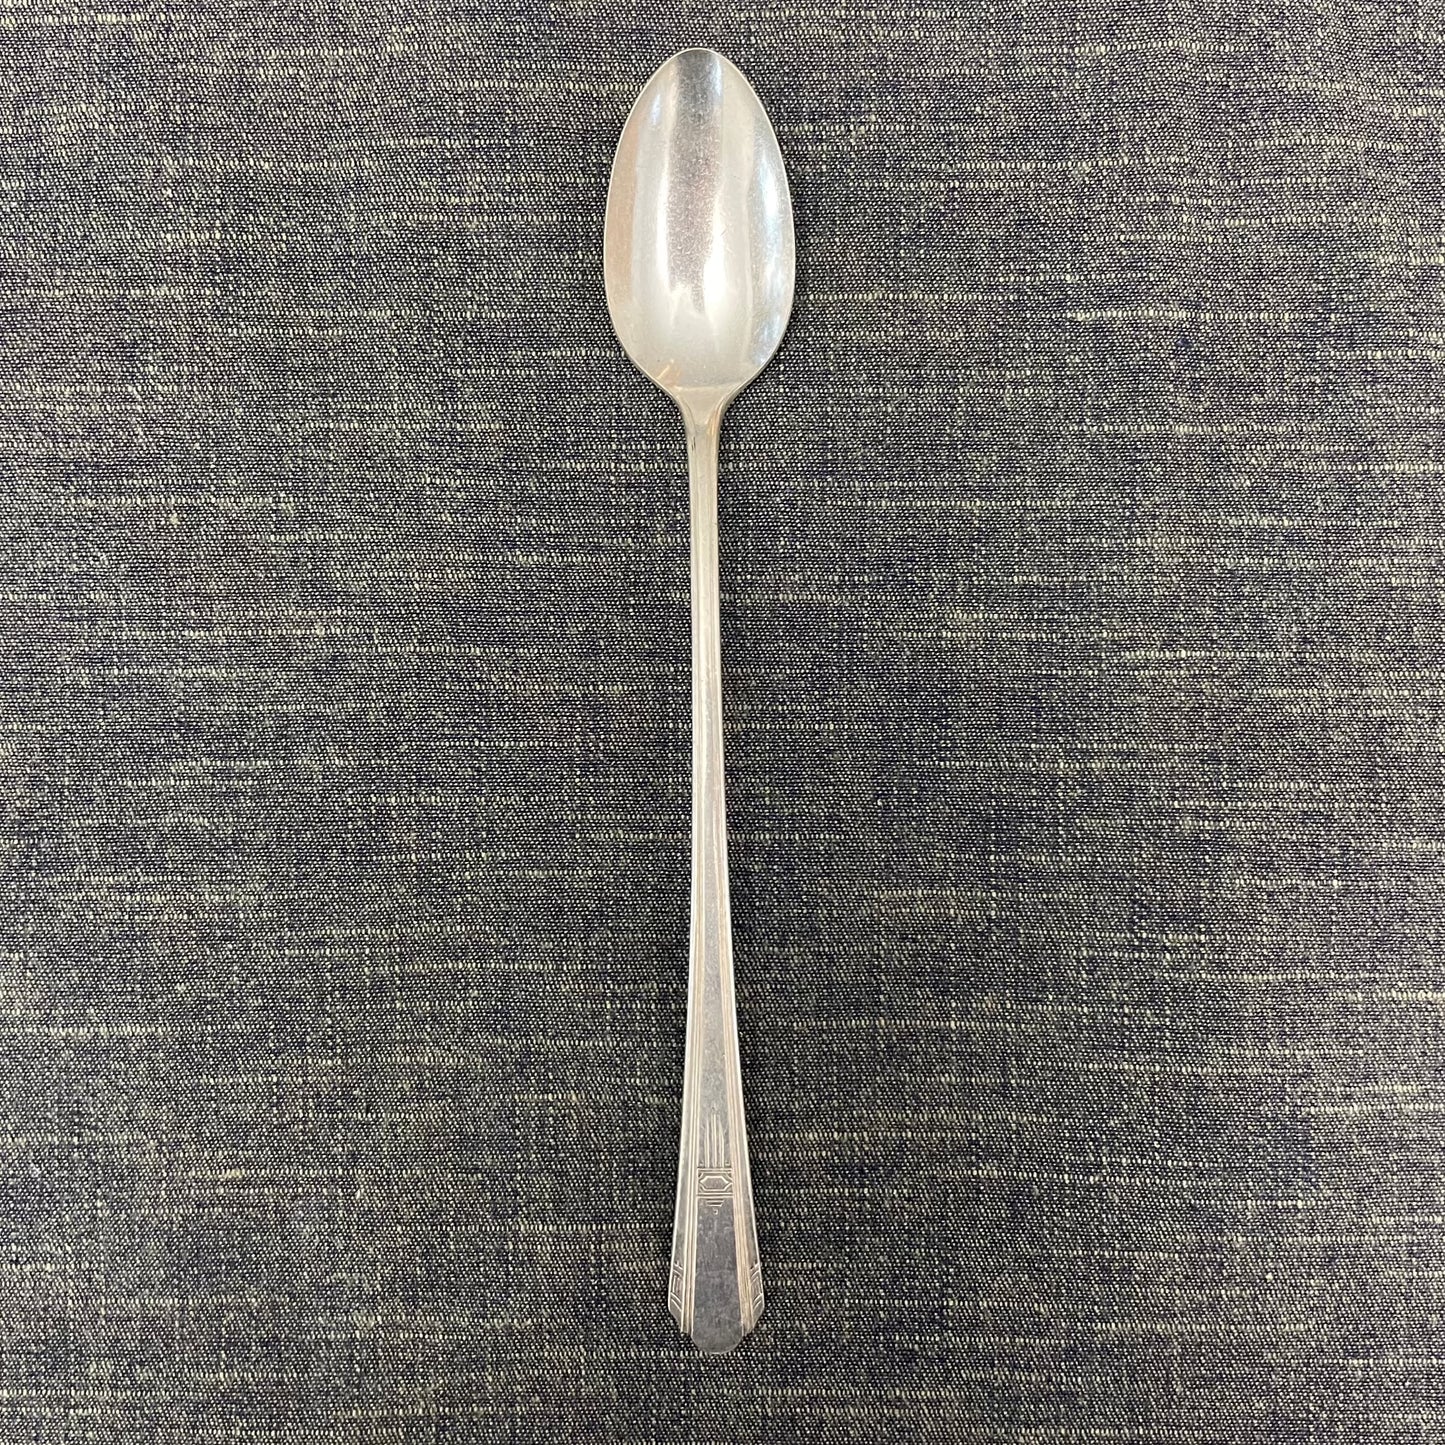 antique silver long handled teaspoon for serving jam or prop photography